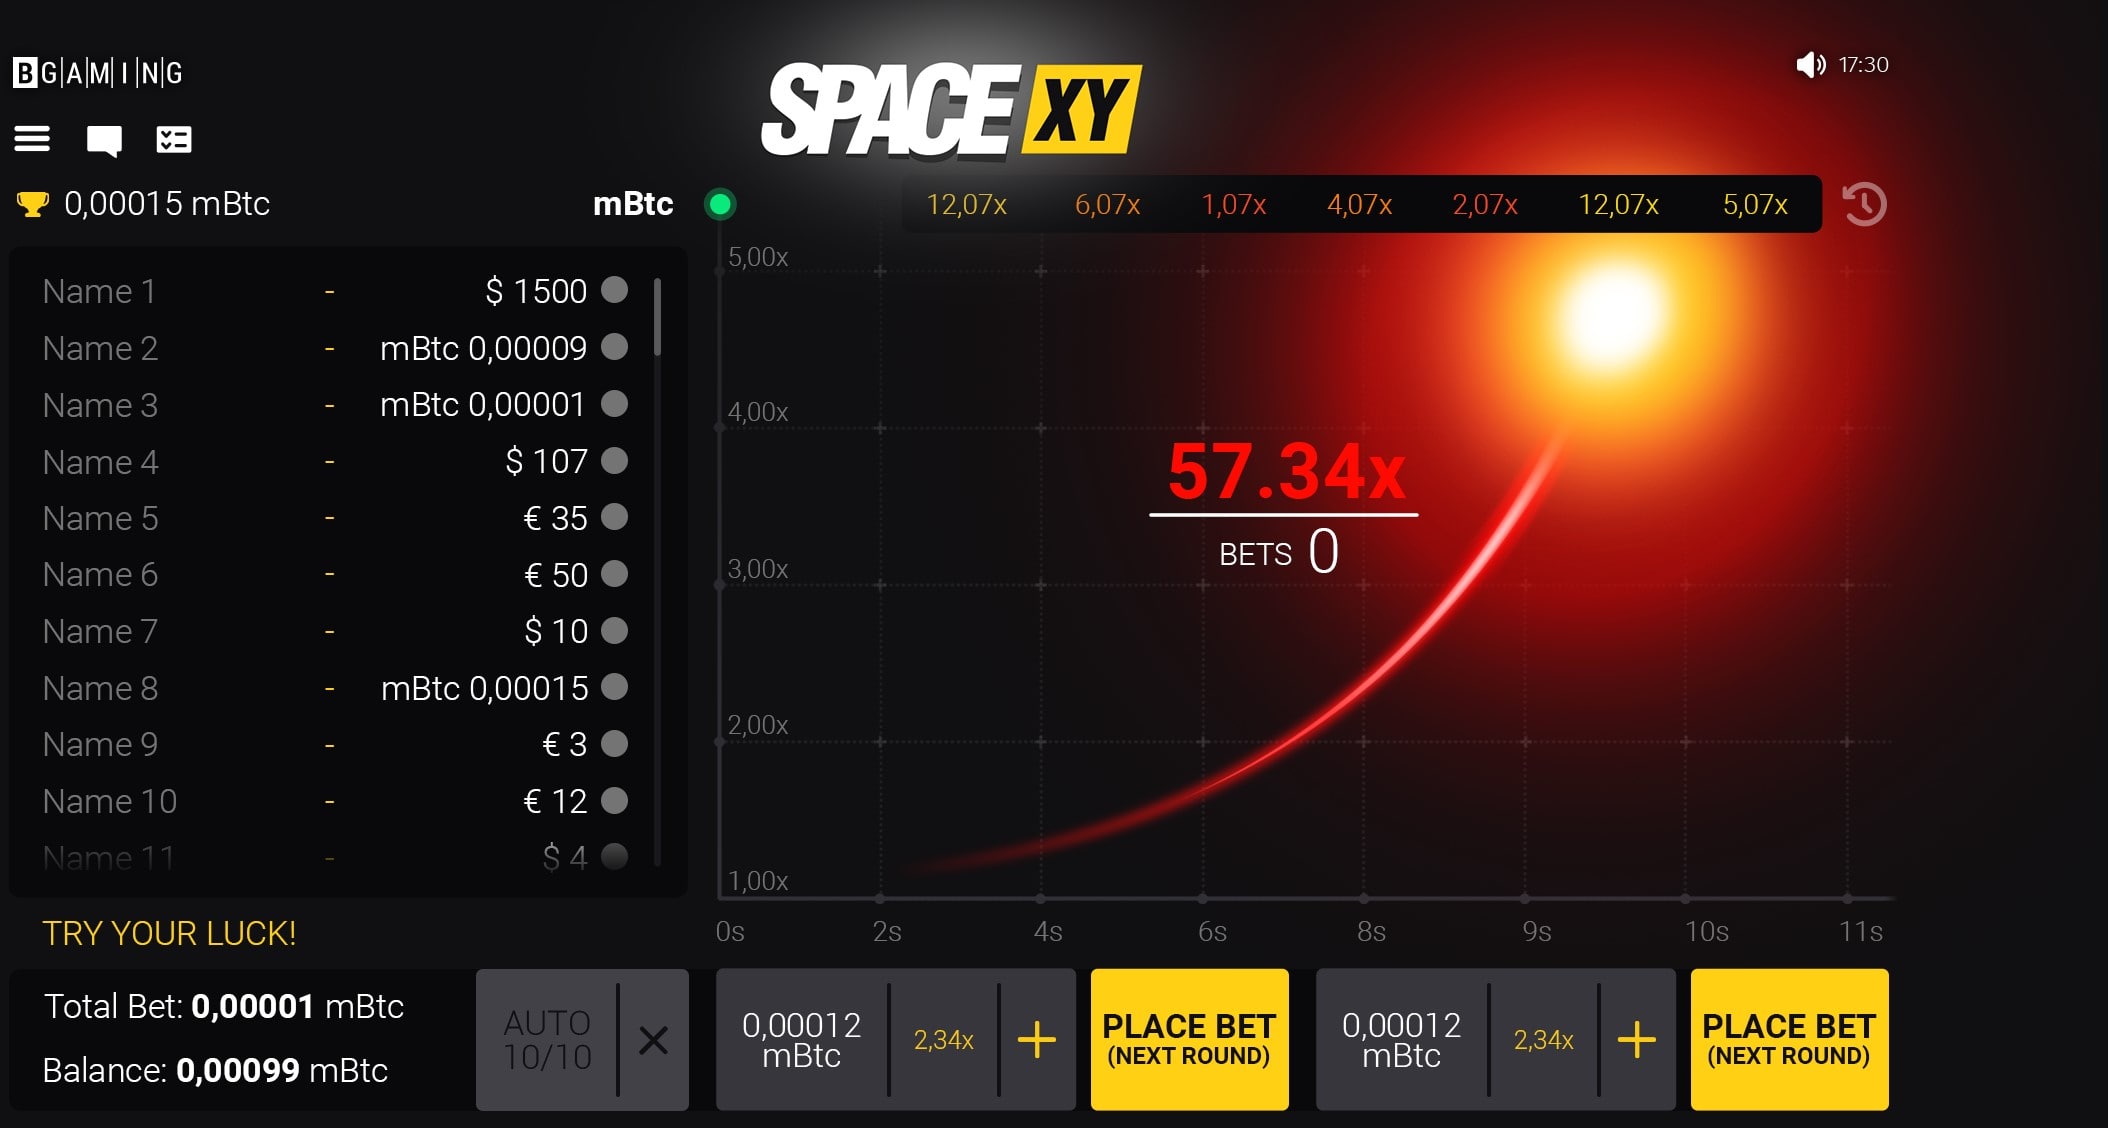 SpaceXY Demo